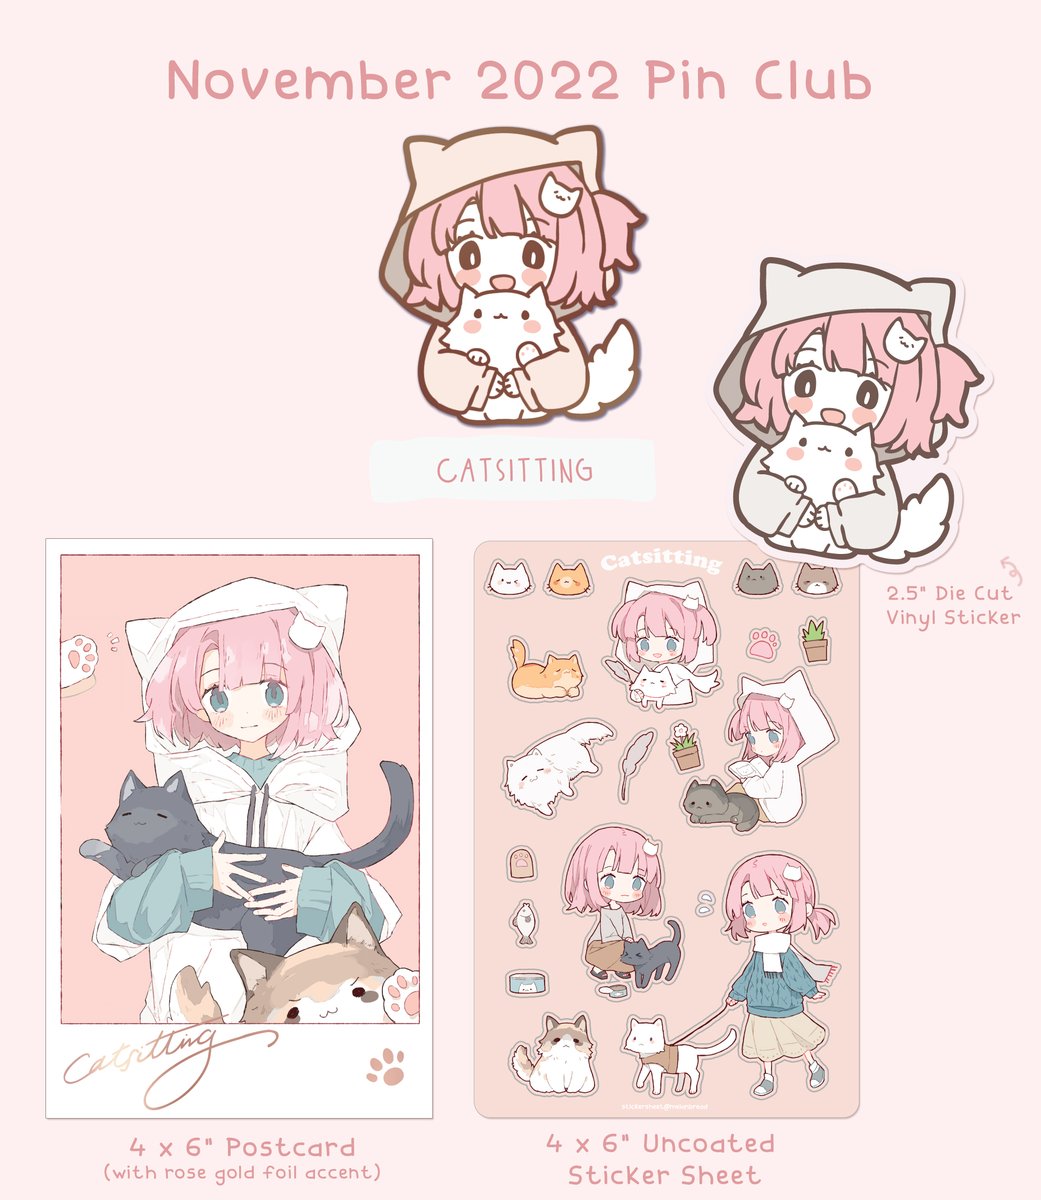 November's Patreon theme is "Catsitting" featuring a character who has a busy job juggling a lot of mischievous cats!
This month's merch will be a pin, postcard with foil accent, sticker sheet, and vinyl sticker. Pledge during the month of November to get it shipped.⁣⁣ 